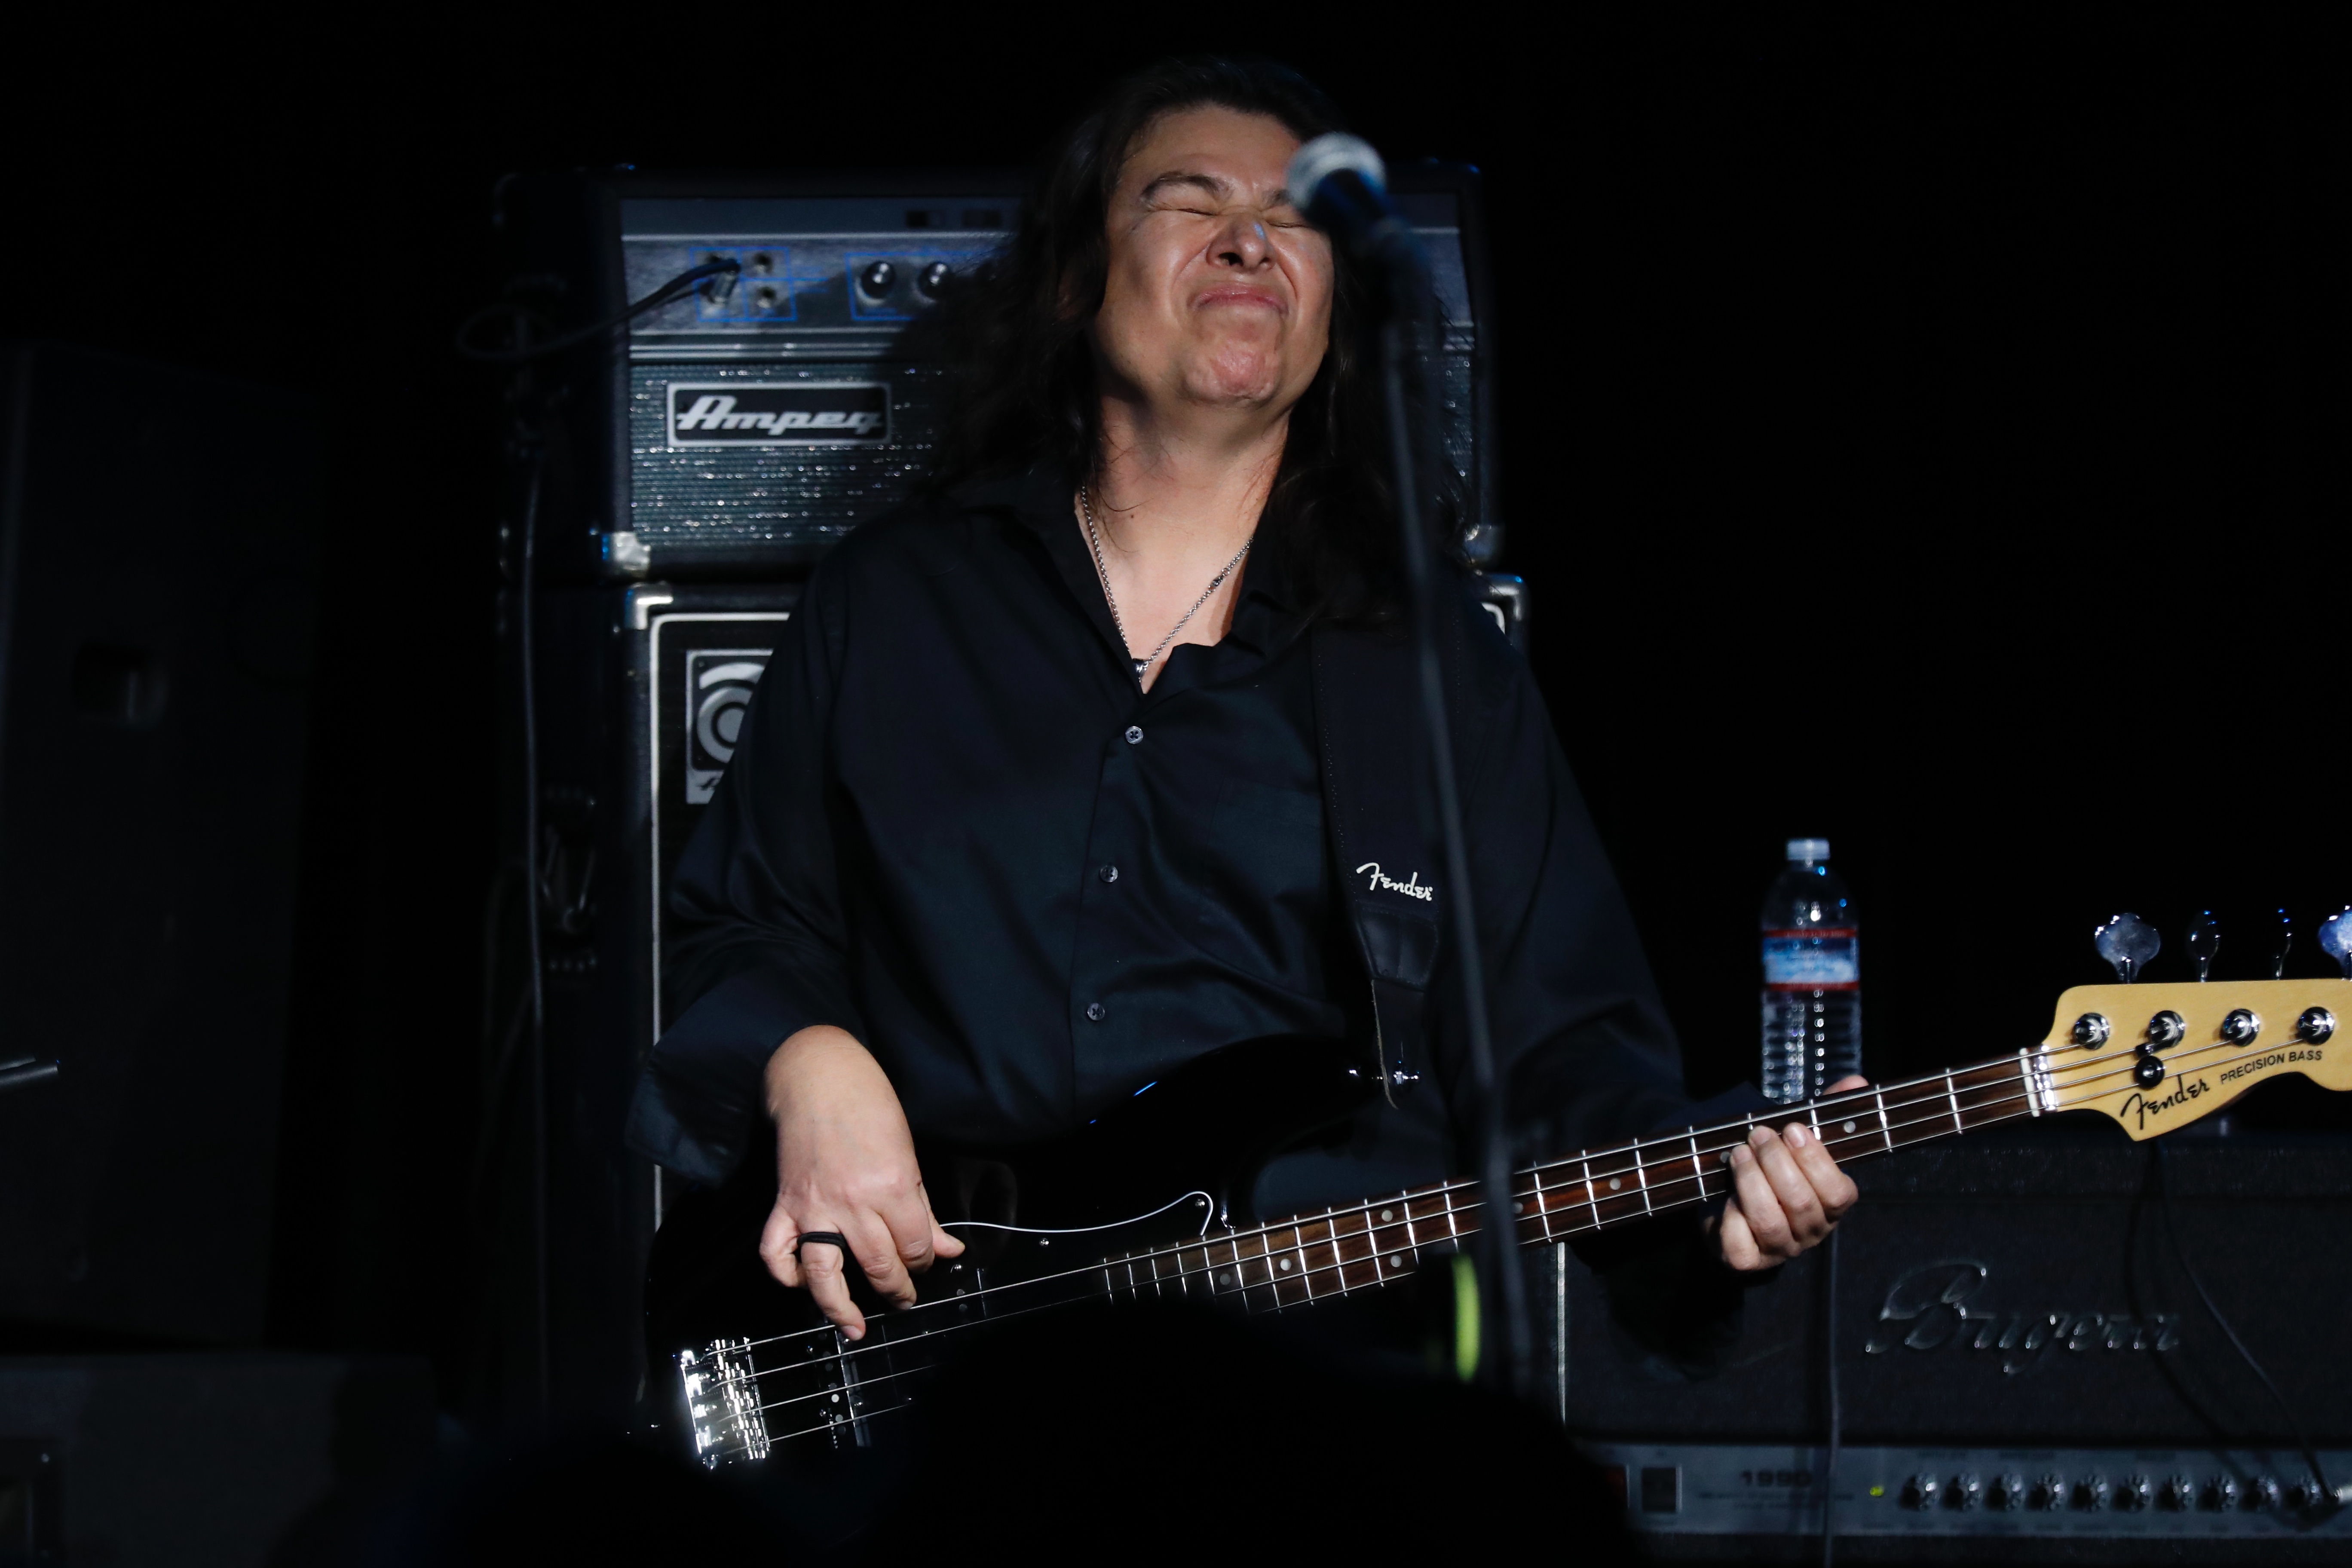 Al Ortiz has toured for years playing bass guitar for Stevie Nicks’ band. He's also toured with Sister Sledge and shared the stage with Tom Petty, Johnny Rivers, Don Henley, Kid Rock and more.